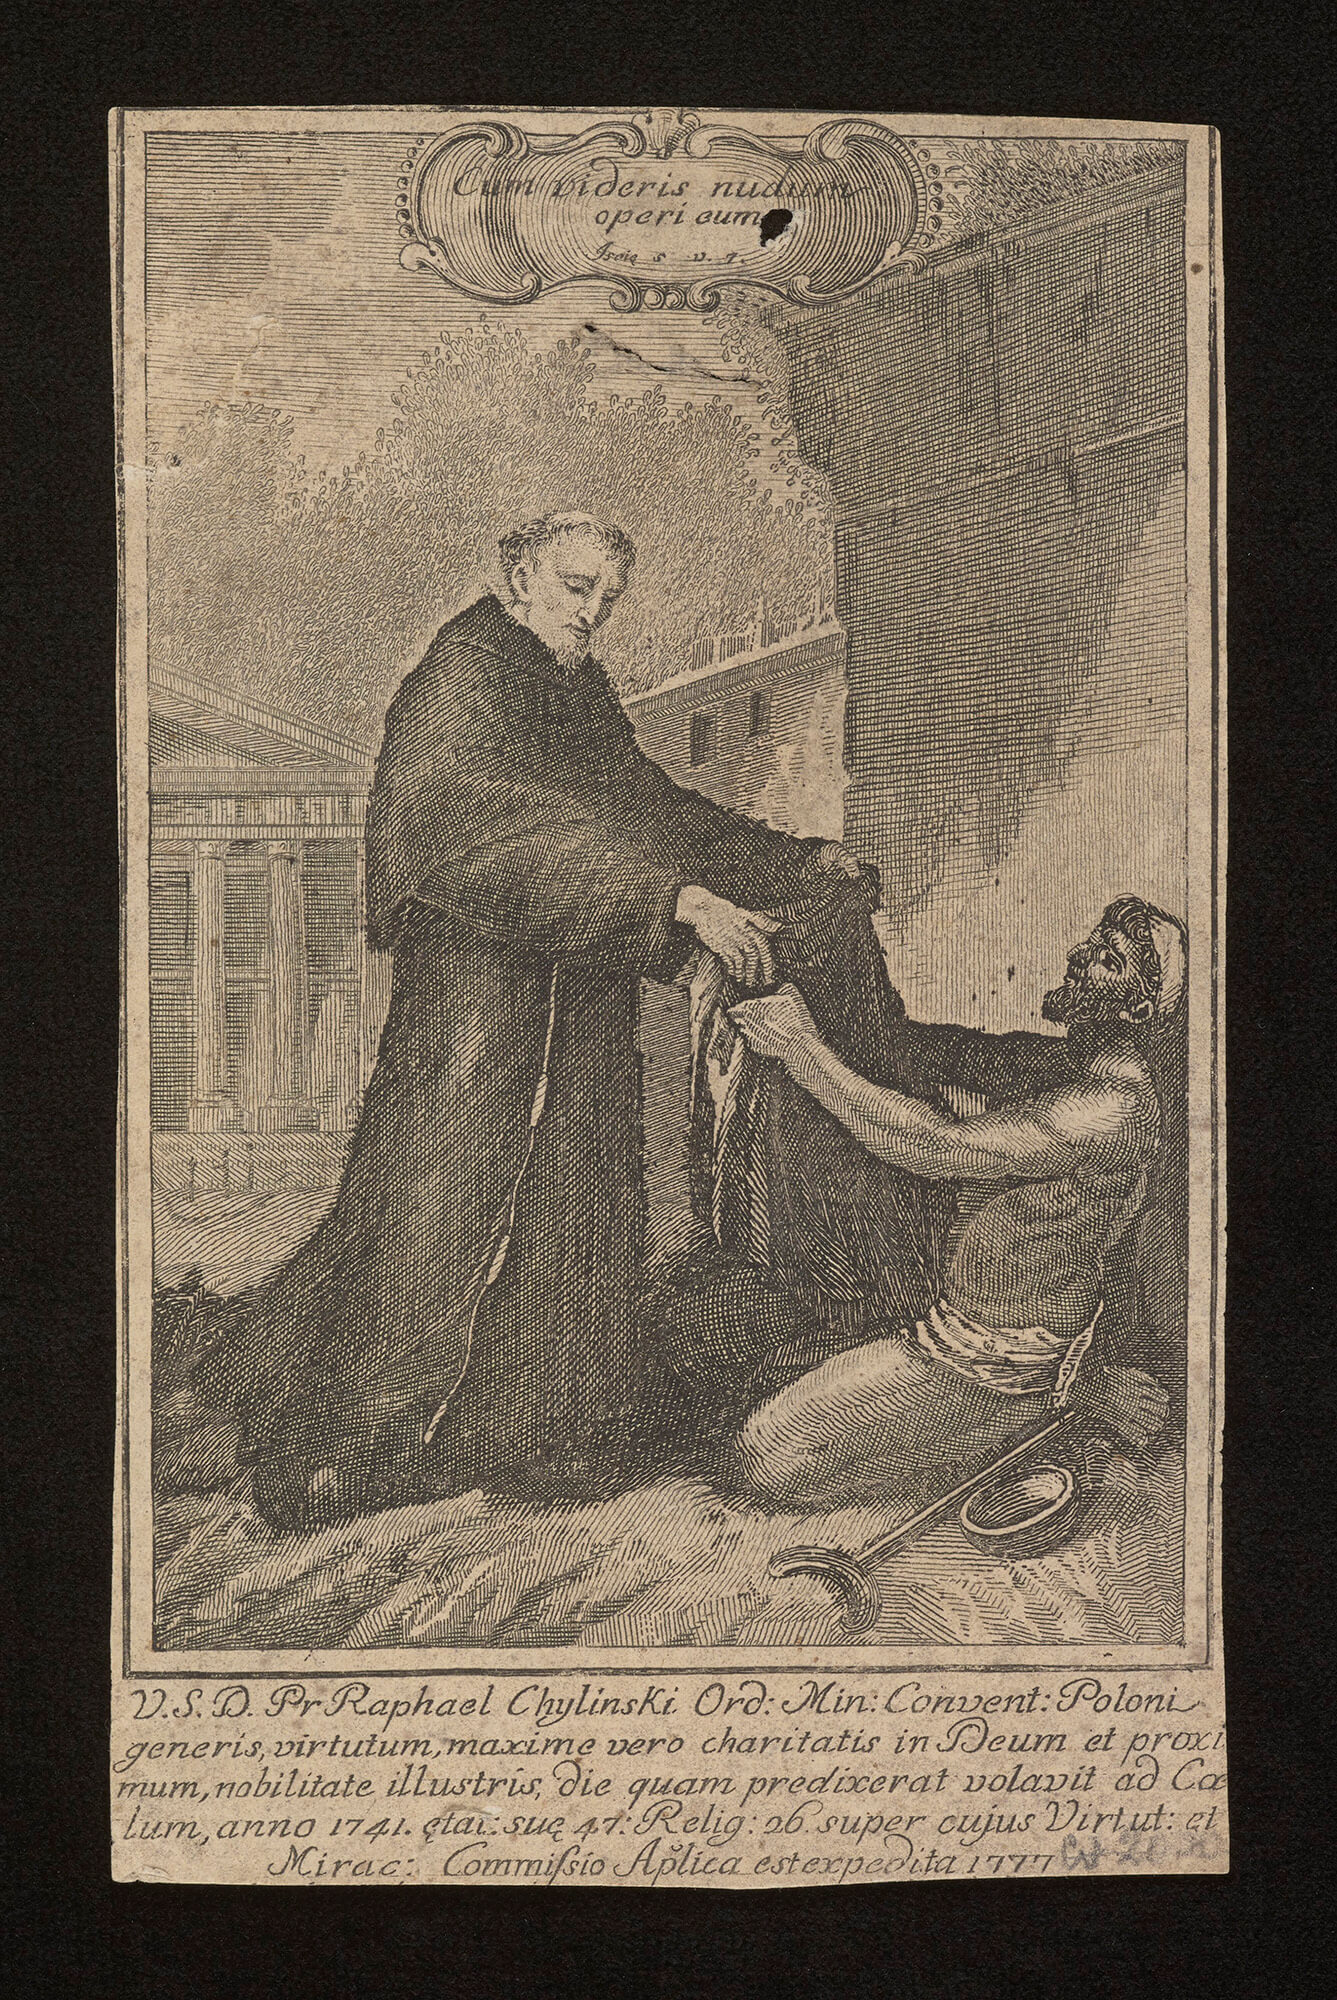 Blessed Chyliński, Bianchi after F. Smuglewicz, copperplate, late 18th century, courtesy of the National Library